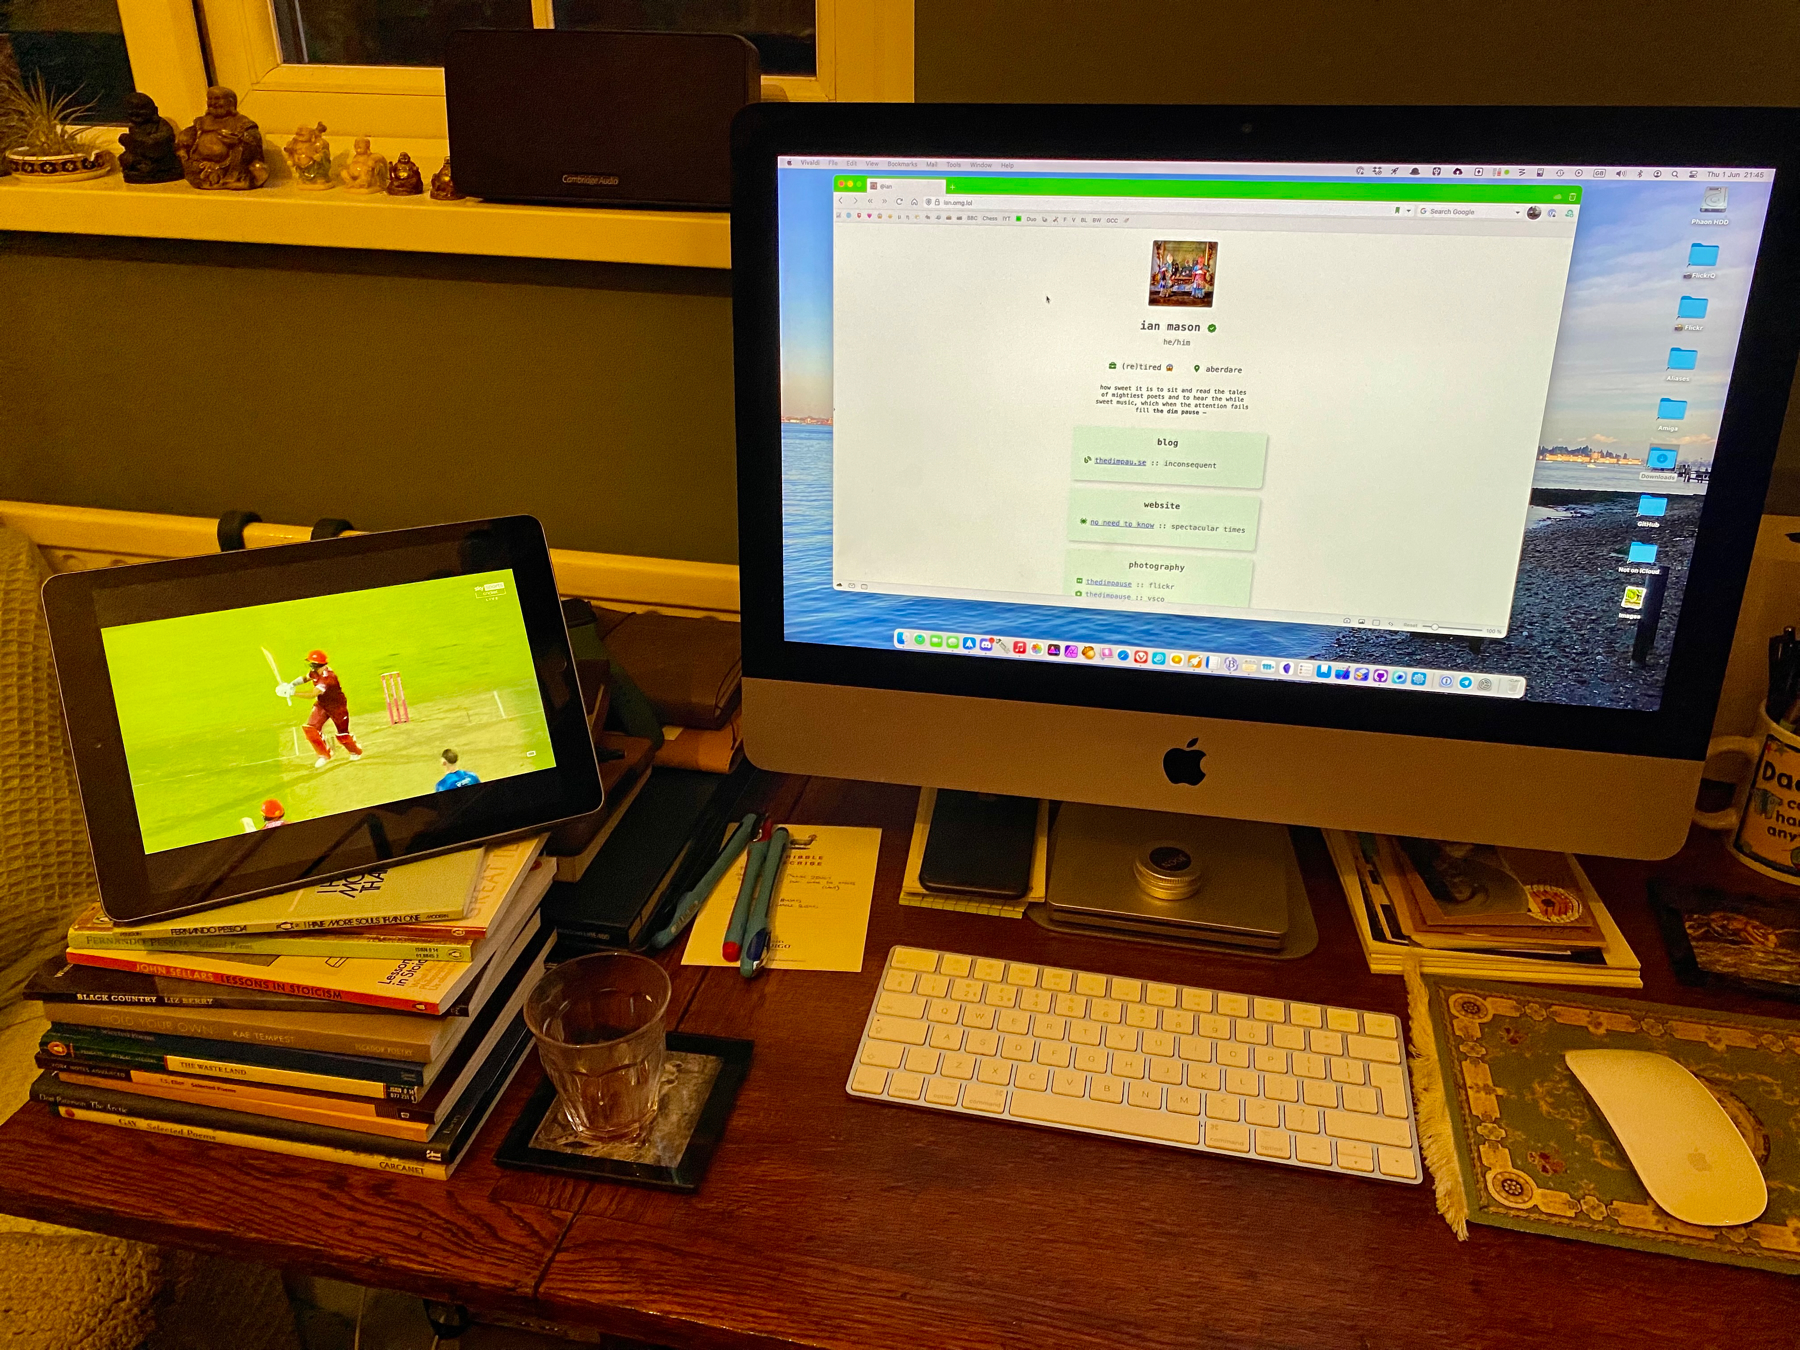 iPad showing live cricket match propped up next to an iMac, both on a crowded, messy desk